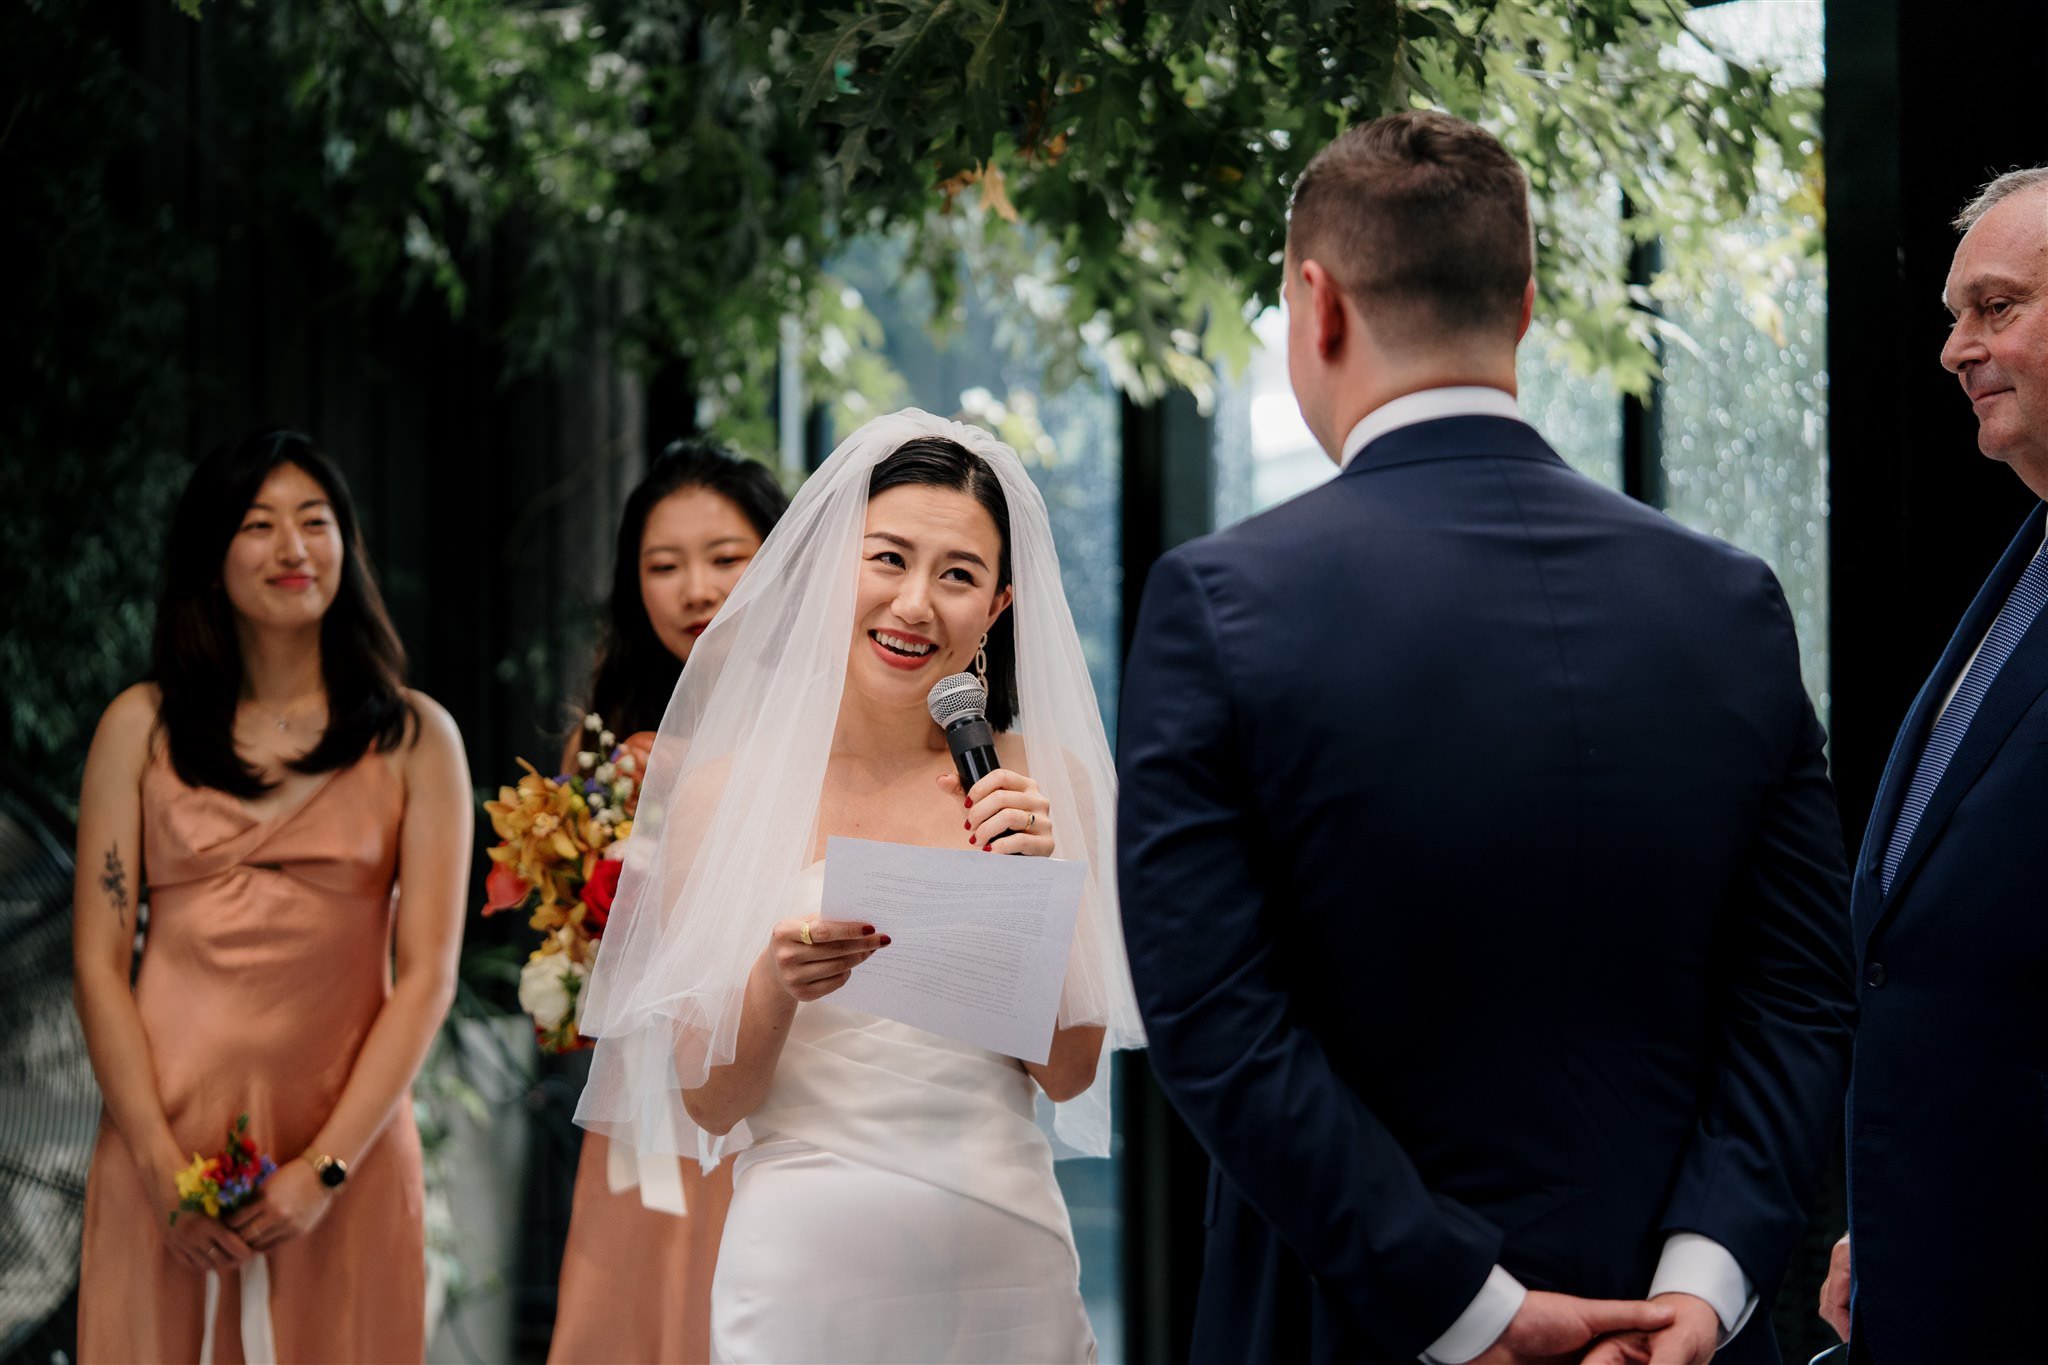 glasshouse-morningside-urban-best-auckland-wedding-venue-central-indoor-photographer-videographer-dear-white-productions-top-industrial-chinese-ceremony-tradition (68).jpg